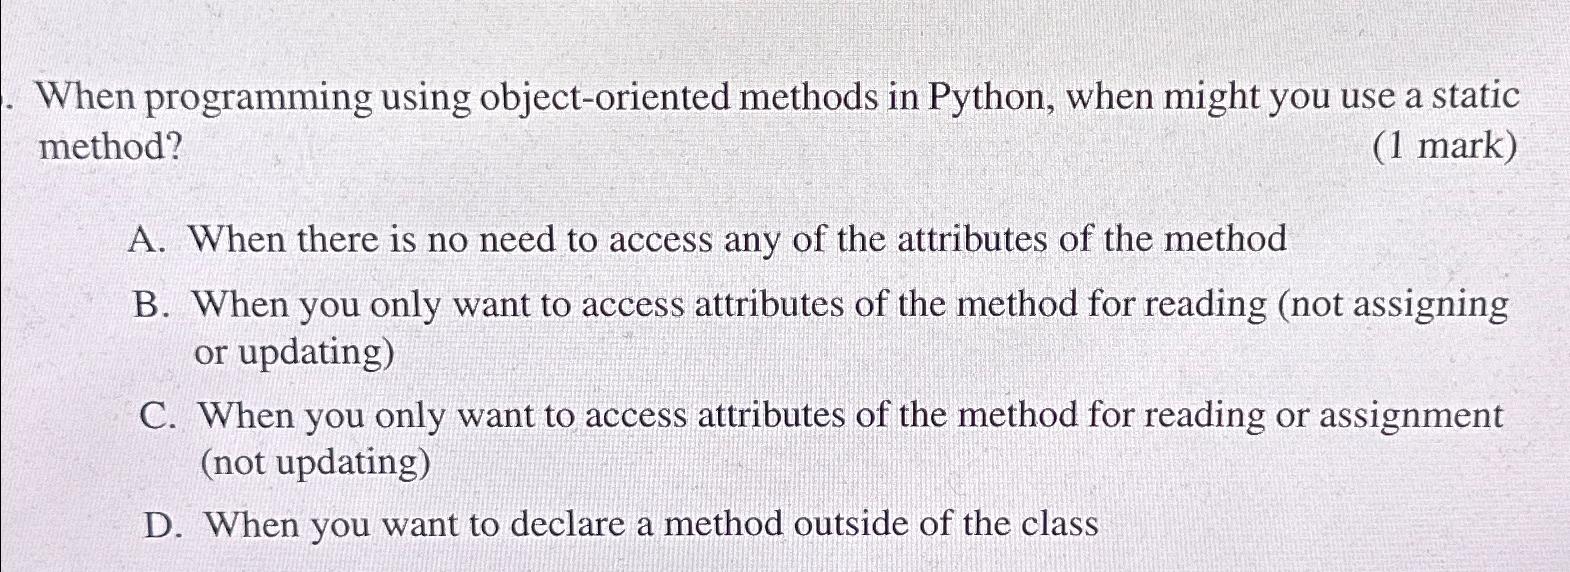 When programming using object-oriented methods in Python, when might you use a static method? (1 mark) A.